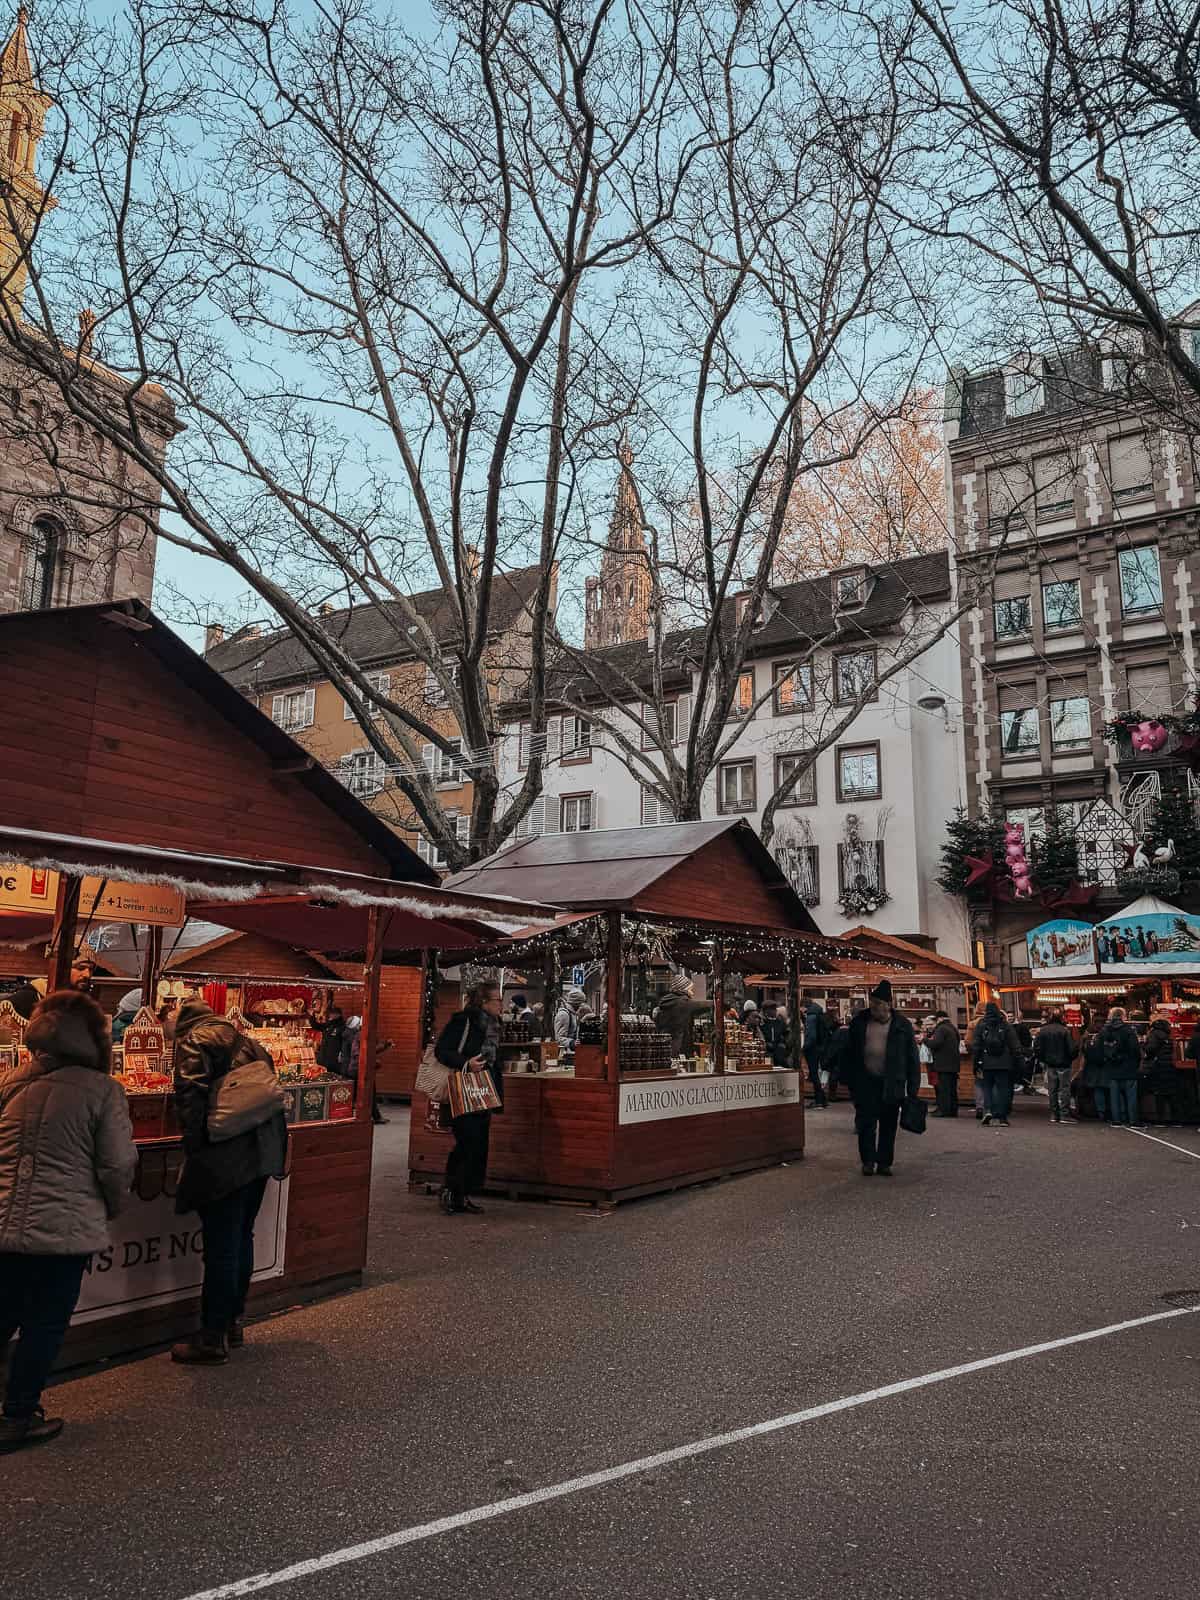 A vibrant Christmas market set in a square with the St. Thomas church in the background, featuring traditional stalls and a lively crowd